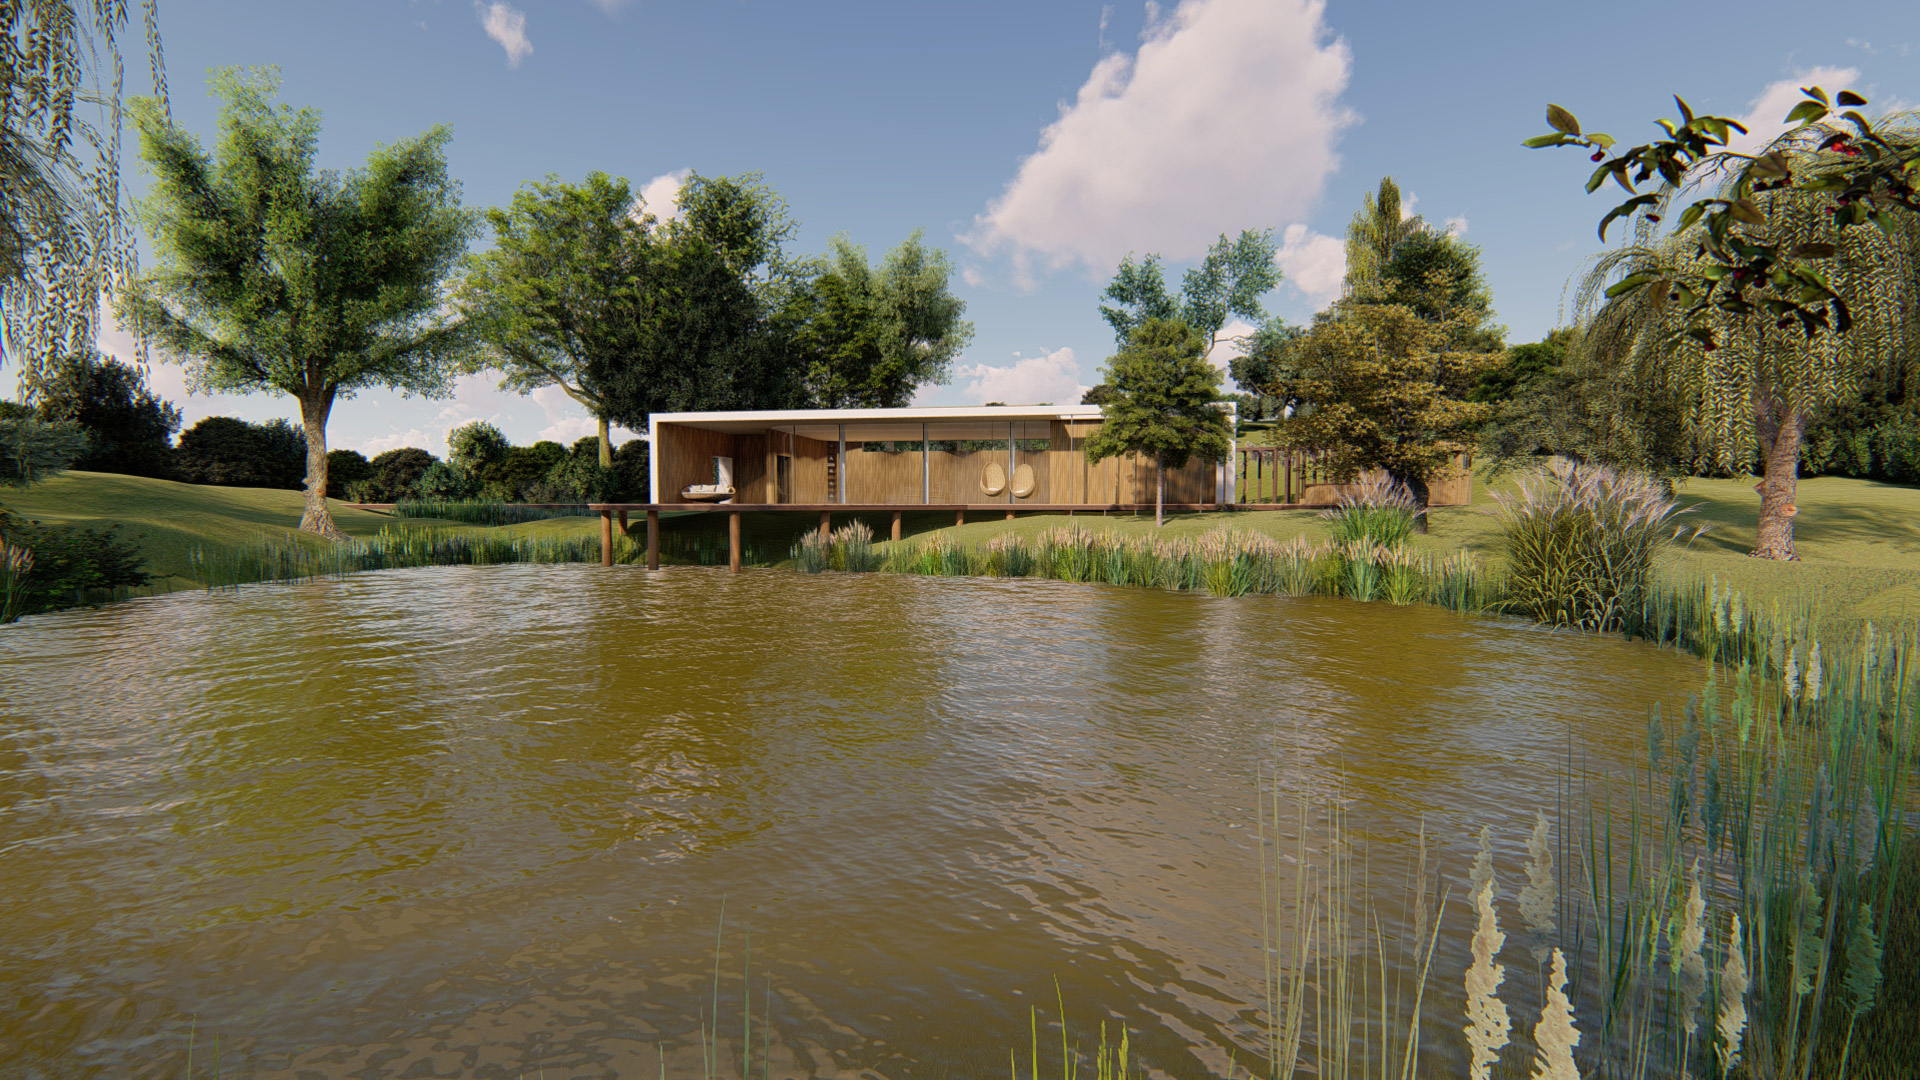 visual for a rural yoga studio with view over pond